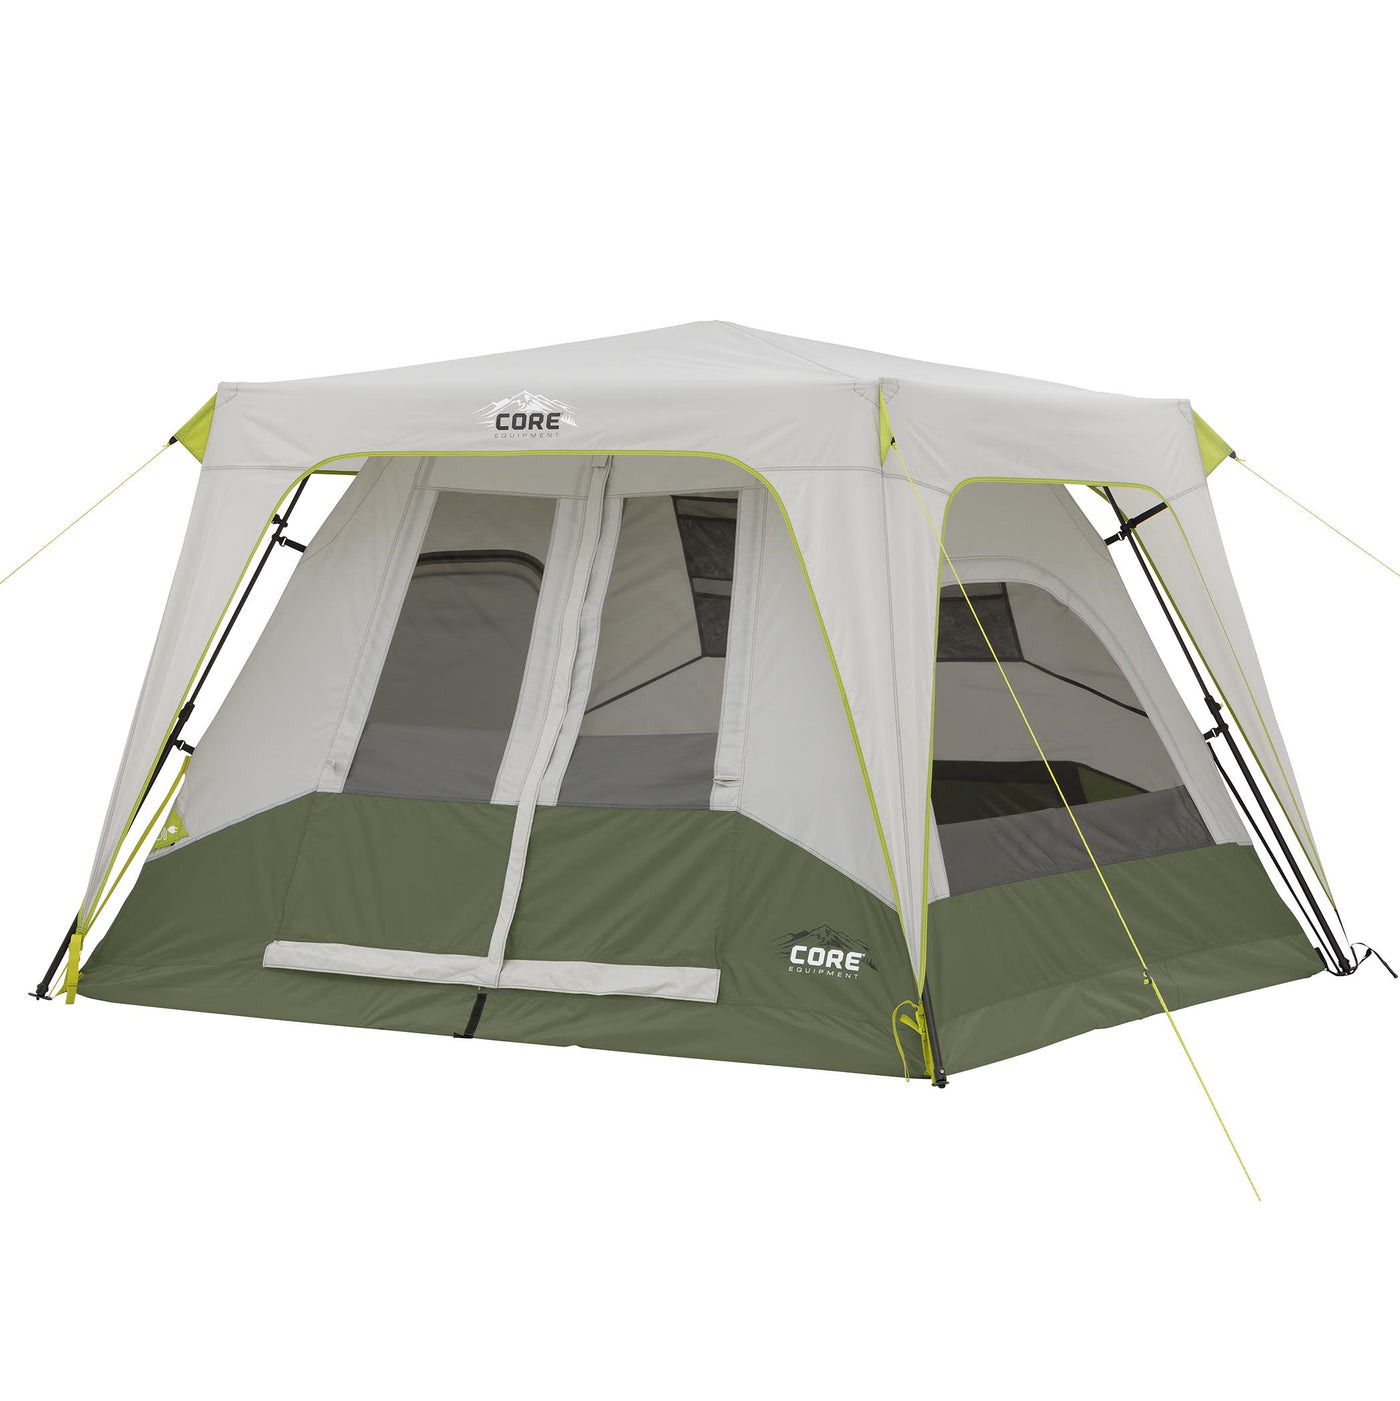 4 Person Instant Cabin Performance Tent 8' x 7